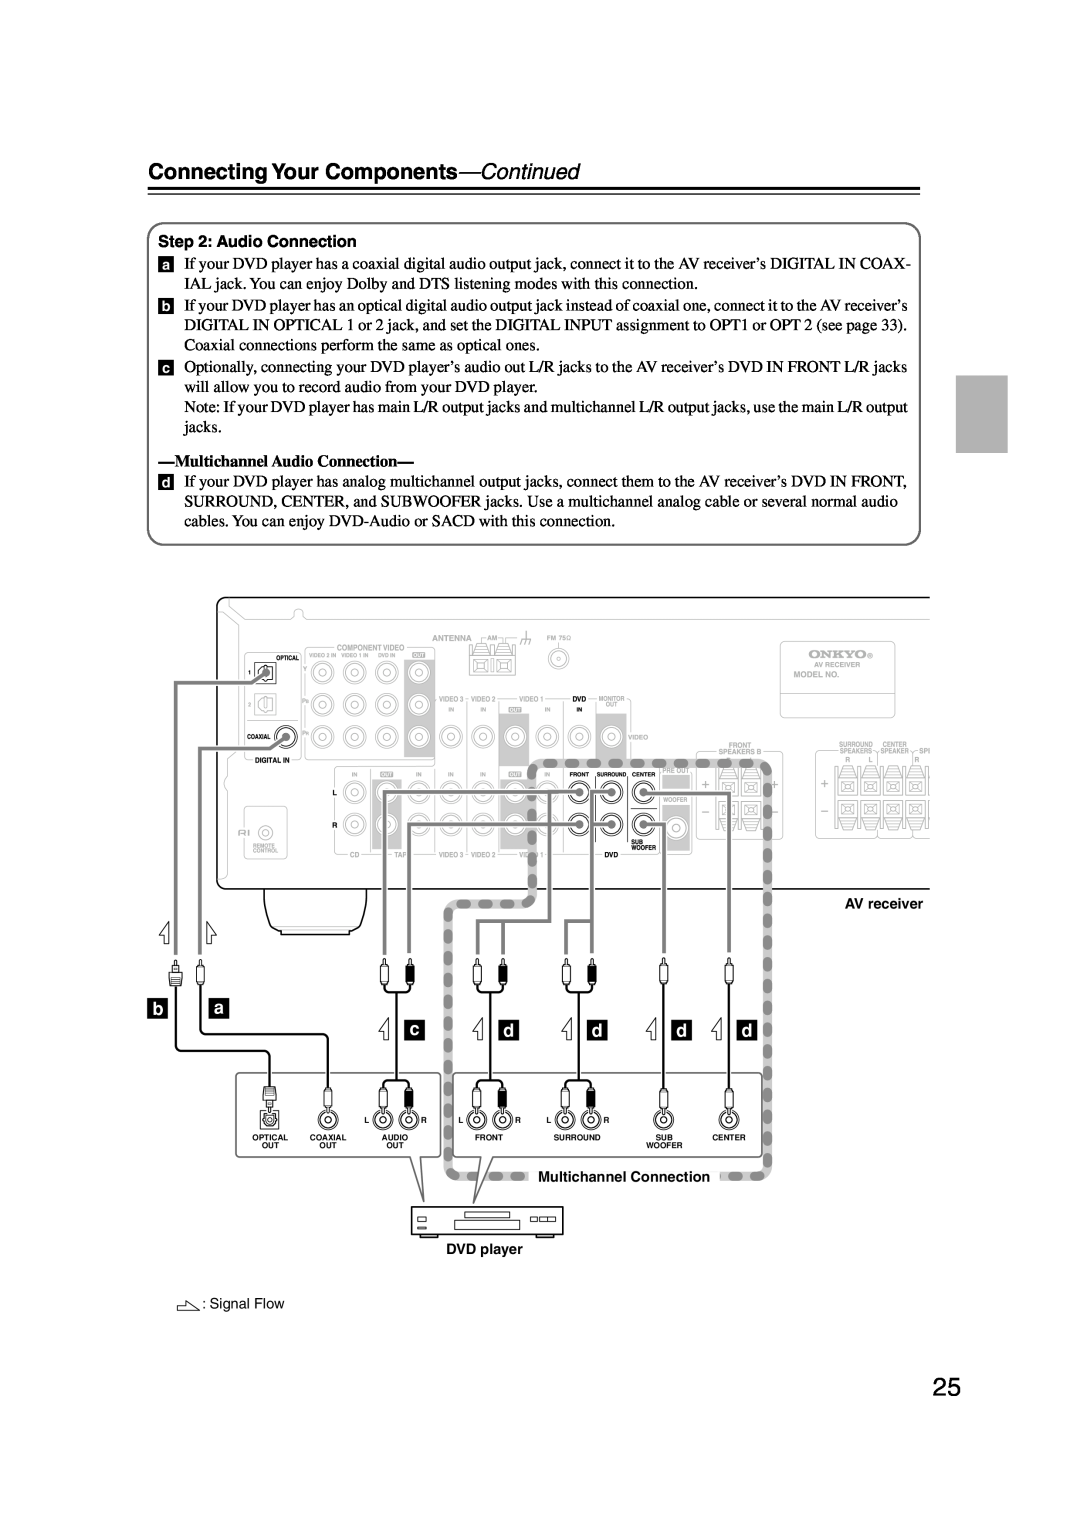 Onkyo TX-SR304 instruction manual b a c, Connecting Your Components-Continued, Audio Connection 